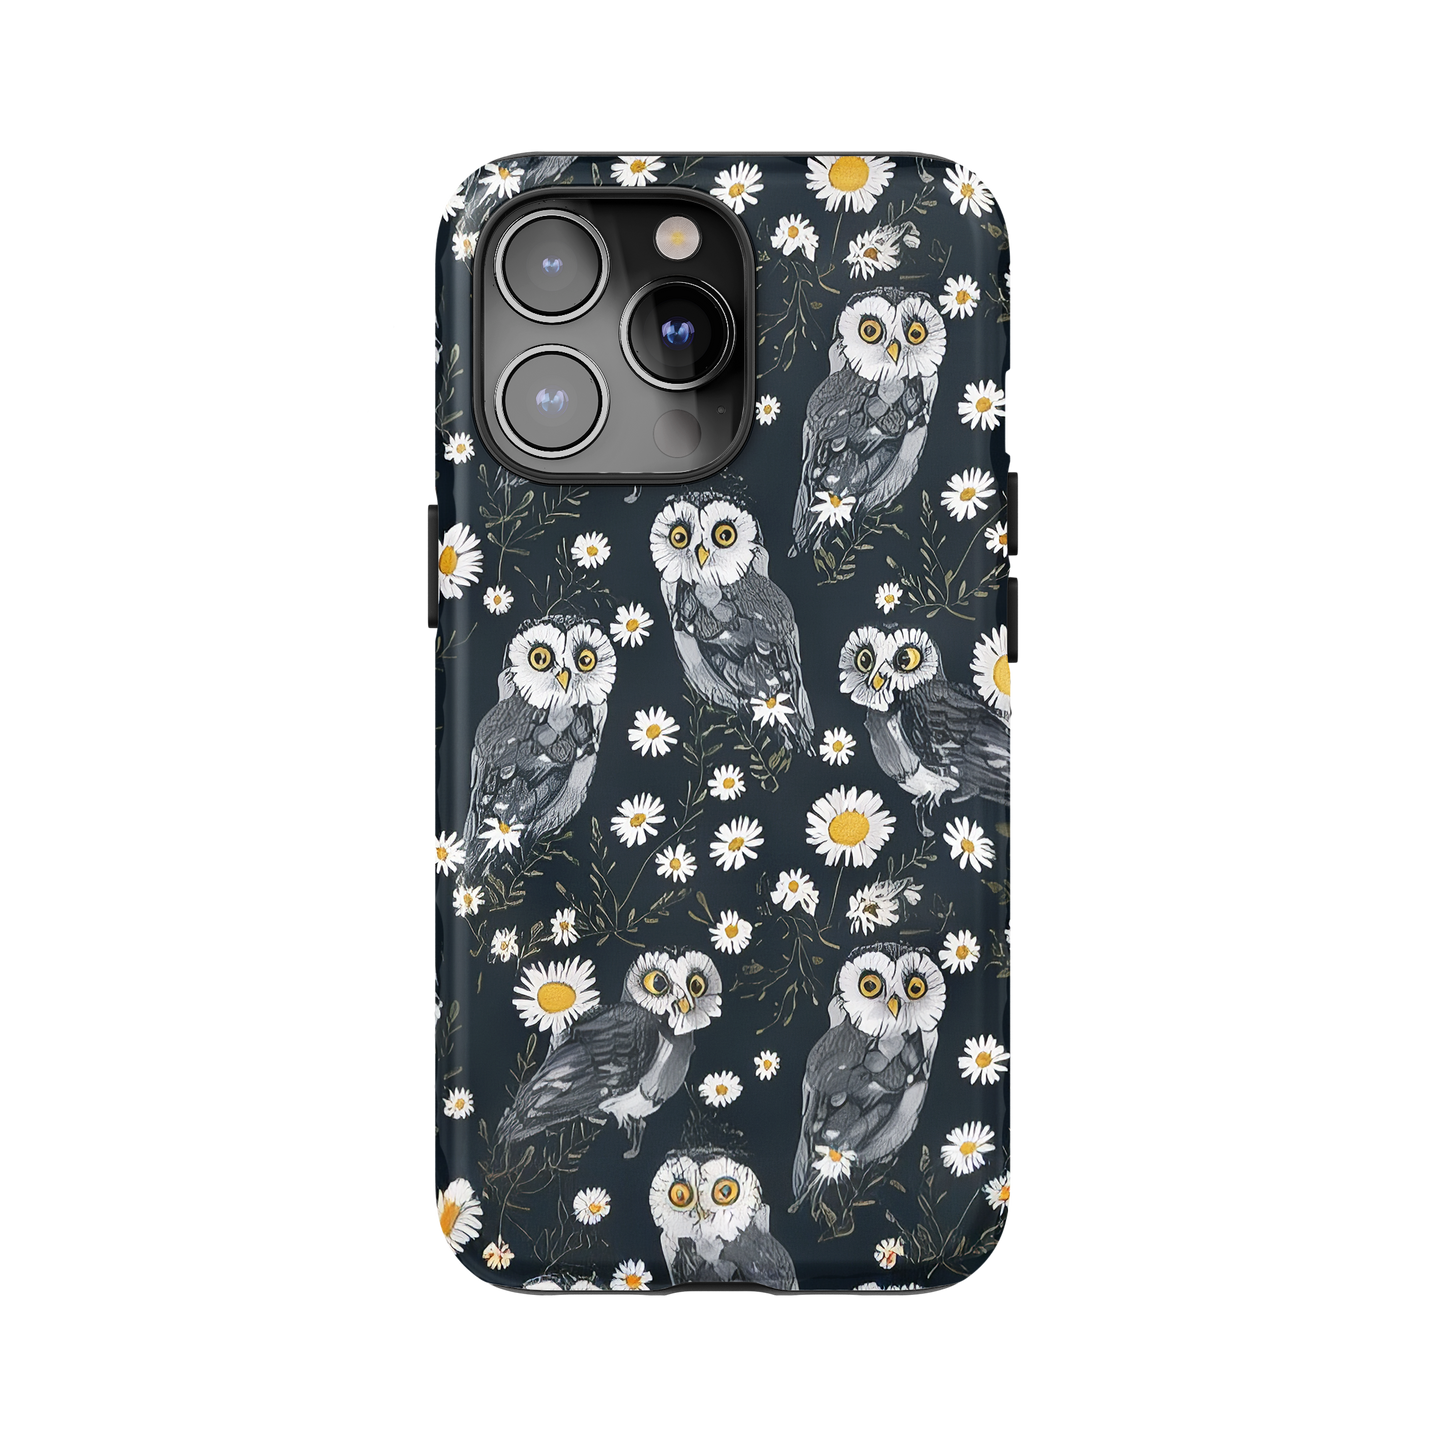 Daisy Owls Phone Case for iPhone and Samsung